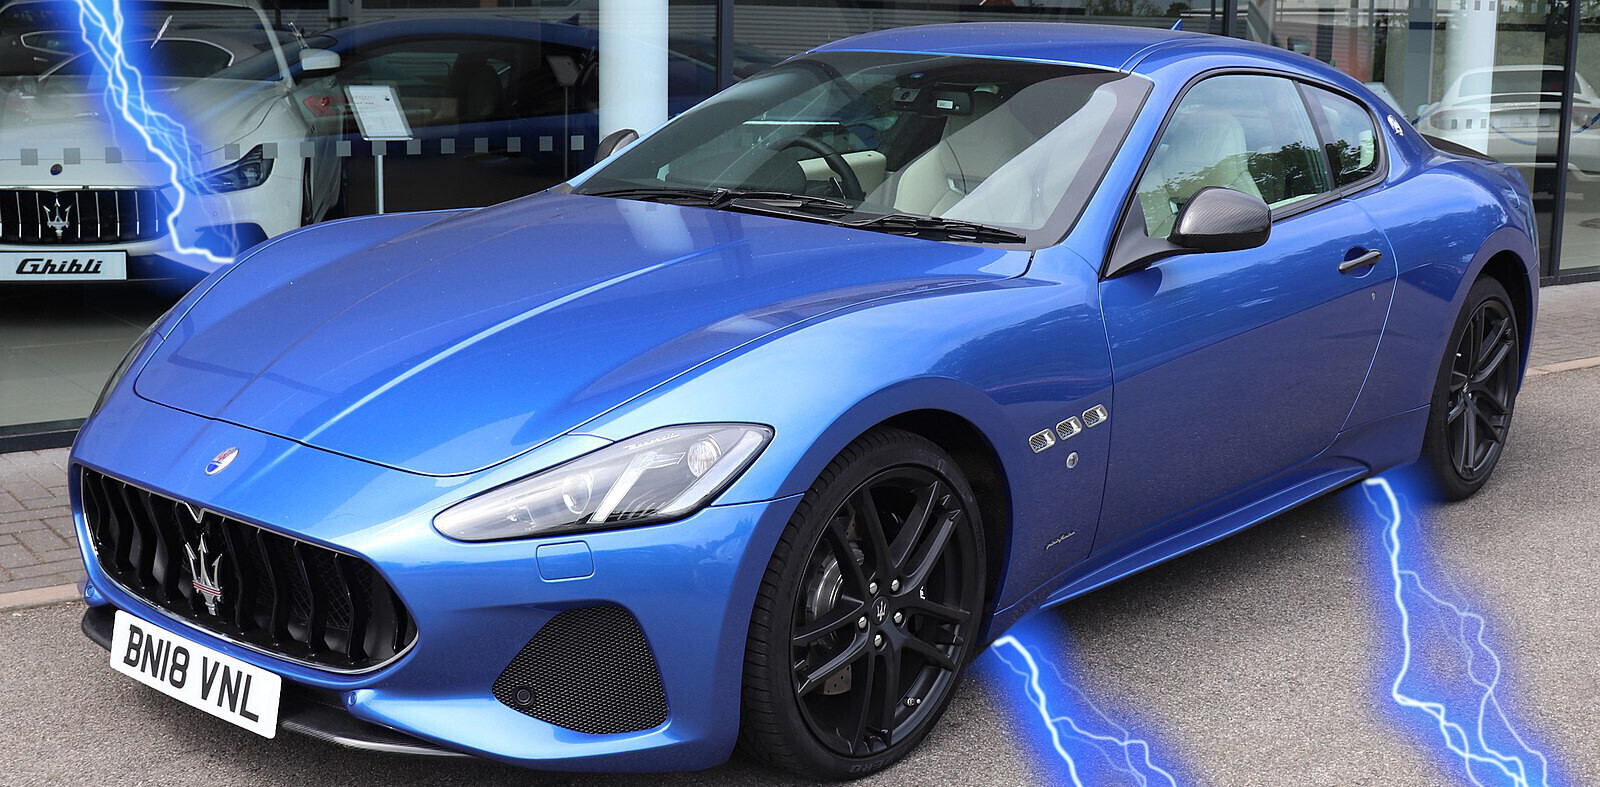 Maserati commits to going electric by 2025, COO says